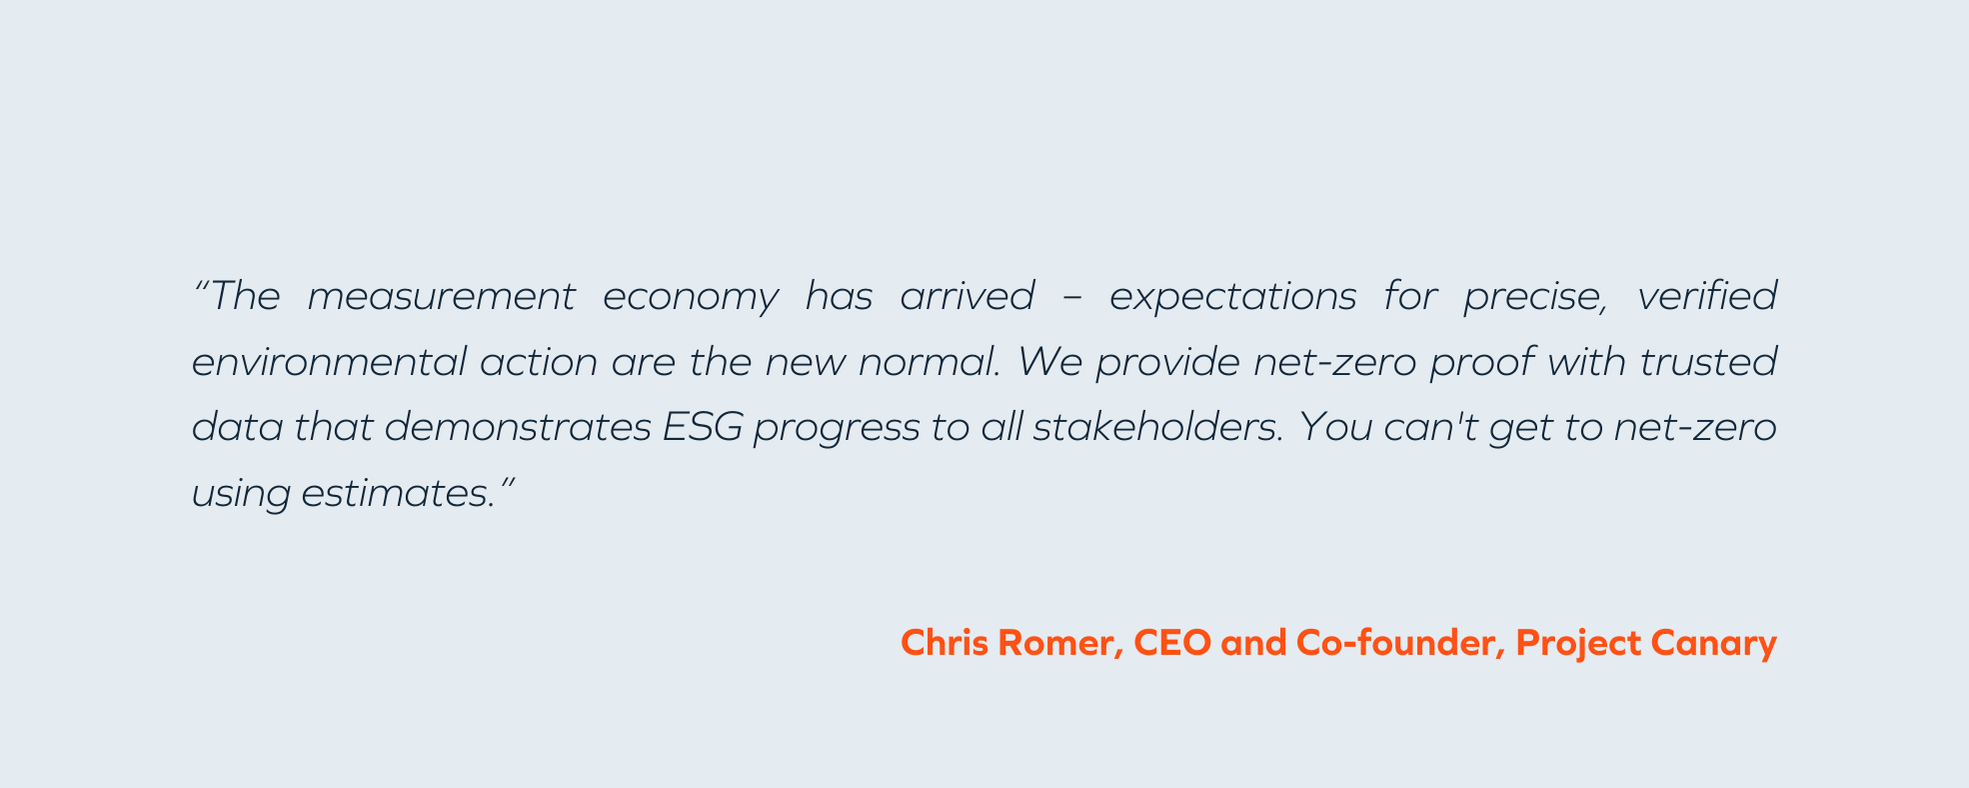 Chris Romer, CEO and Co-founder, Project Canary